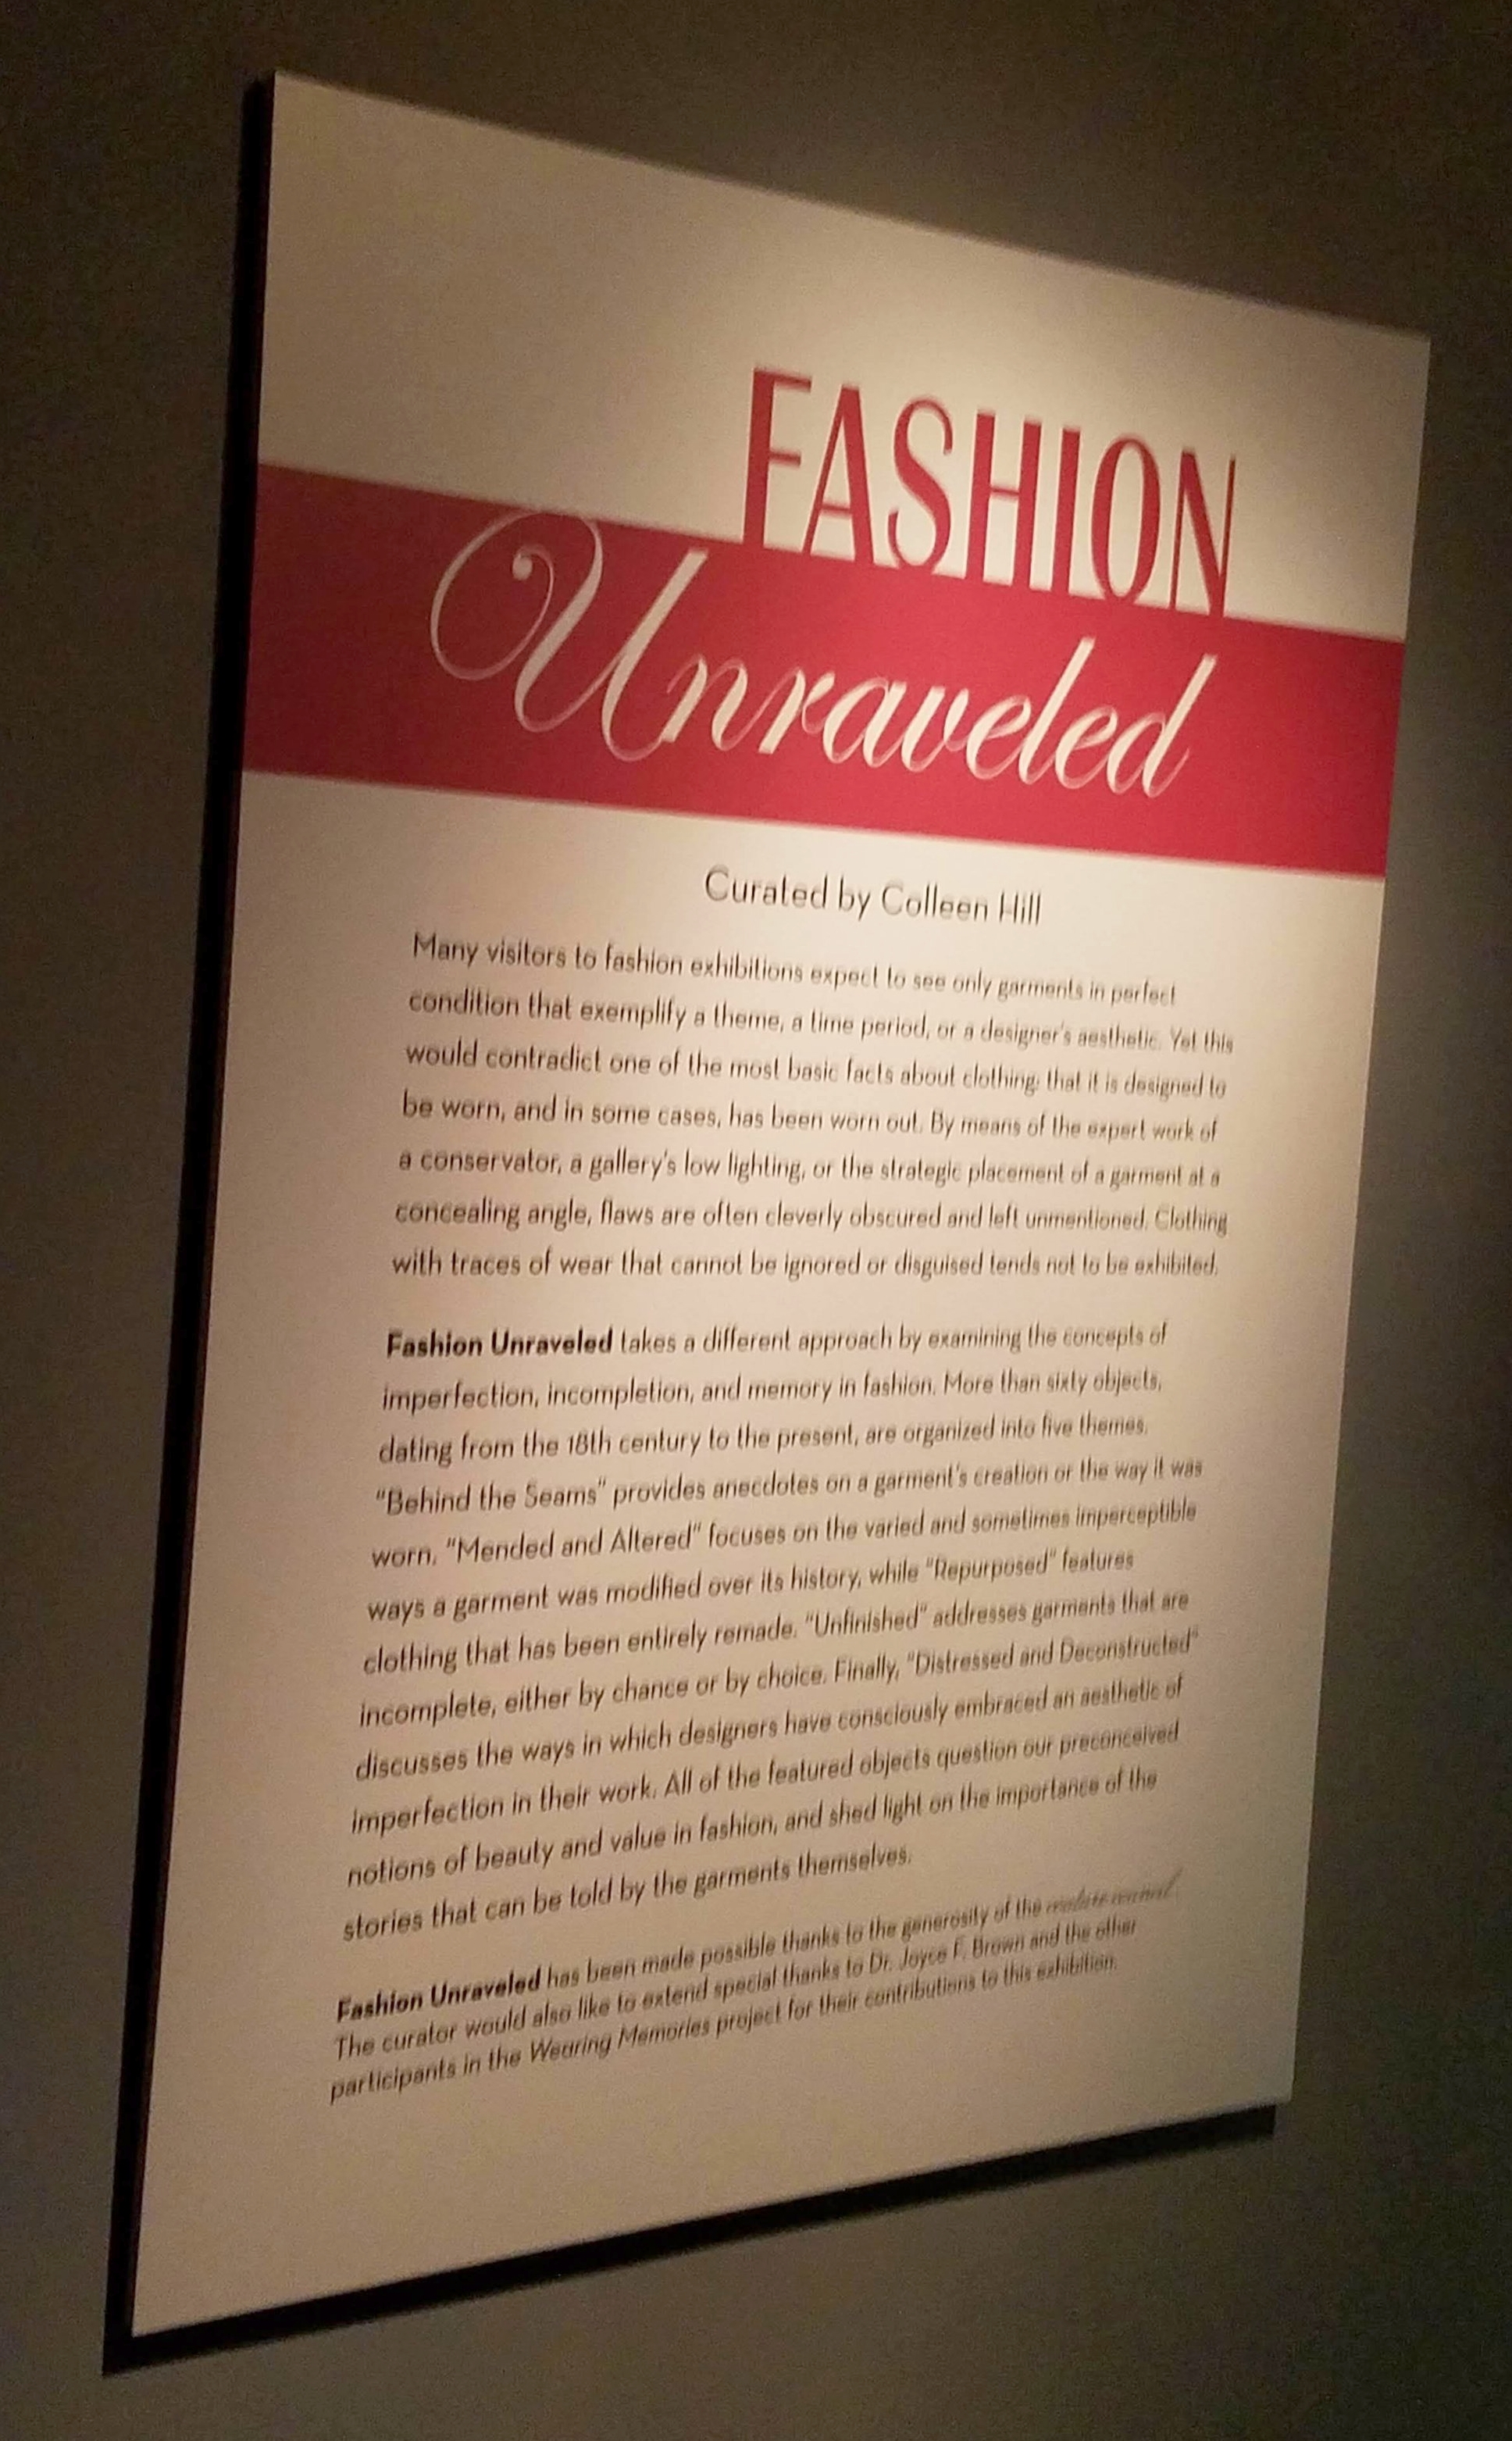  ‘Fashion Unraveled’ Exhibit at the Fashion Institute of Technology (FIT) Museum 